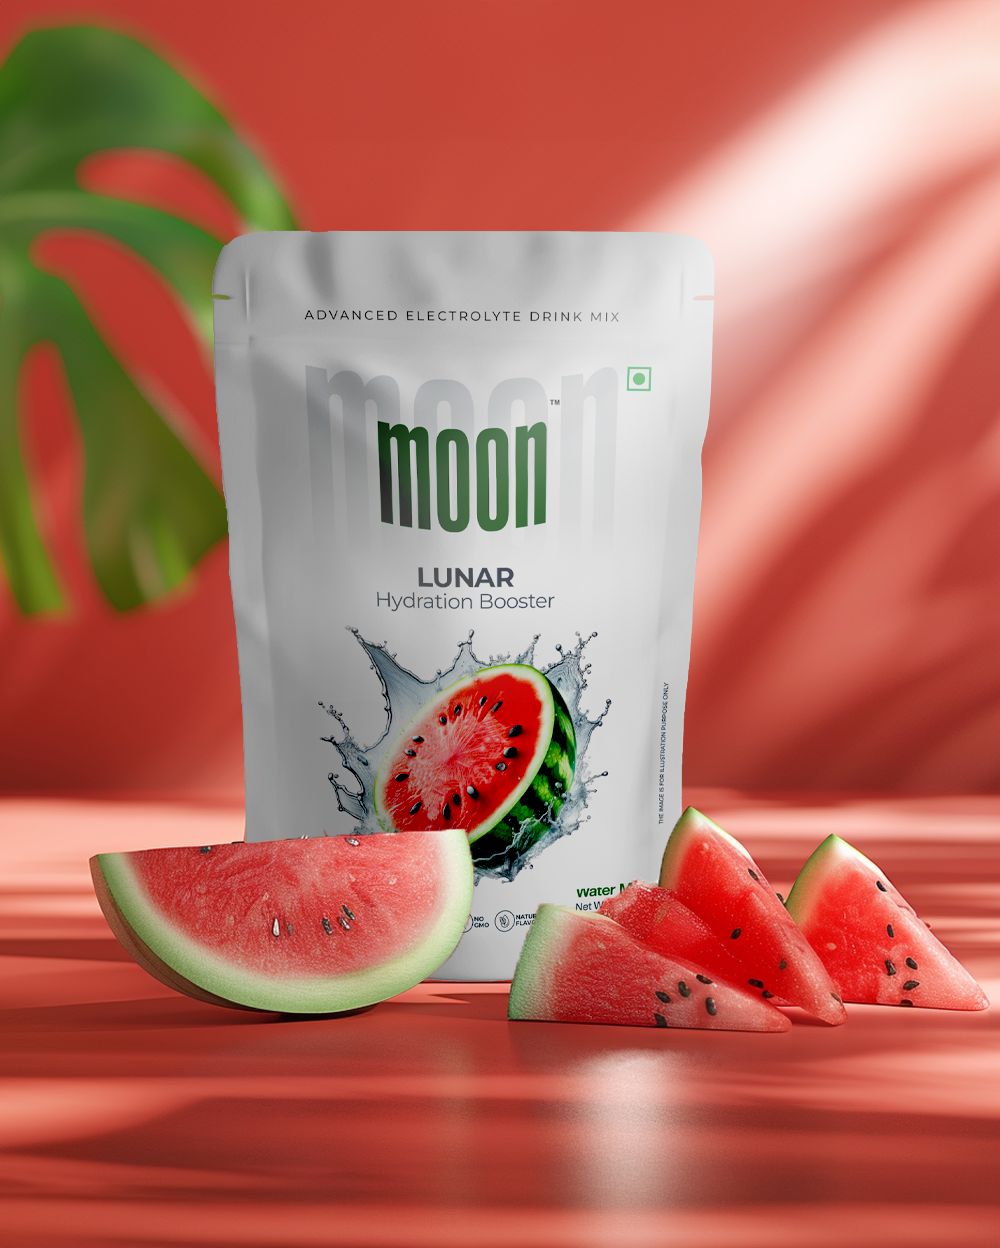 Packaging of MOON Lunar Watermelon + Lemon Hydration Booster drink mix with watermelon slices on a table.